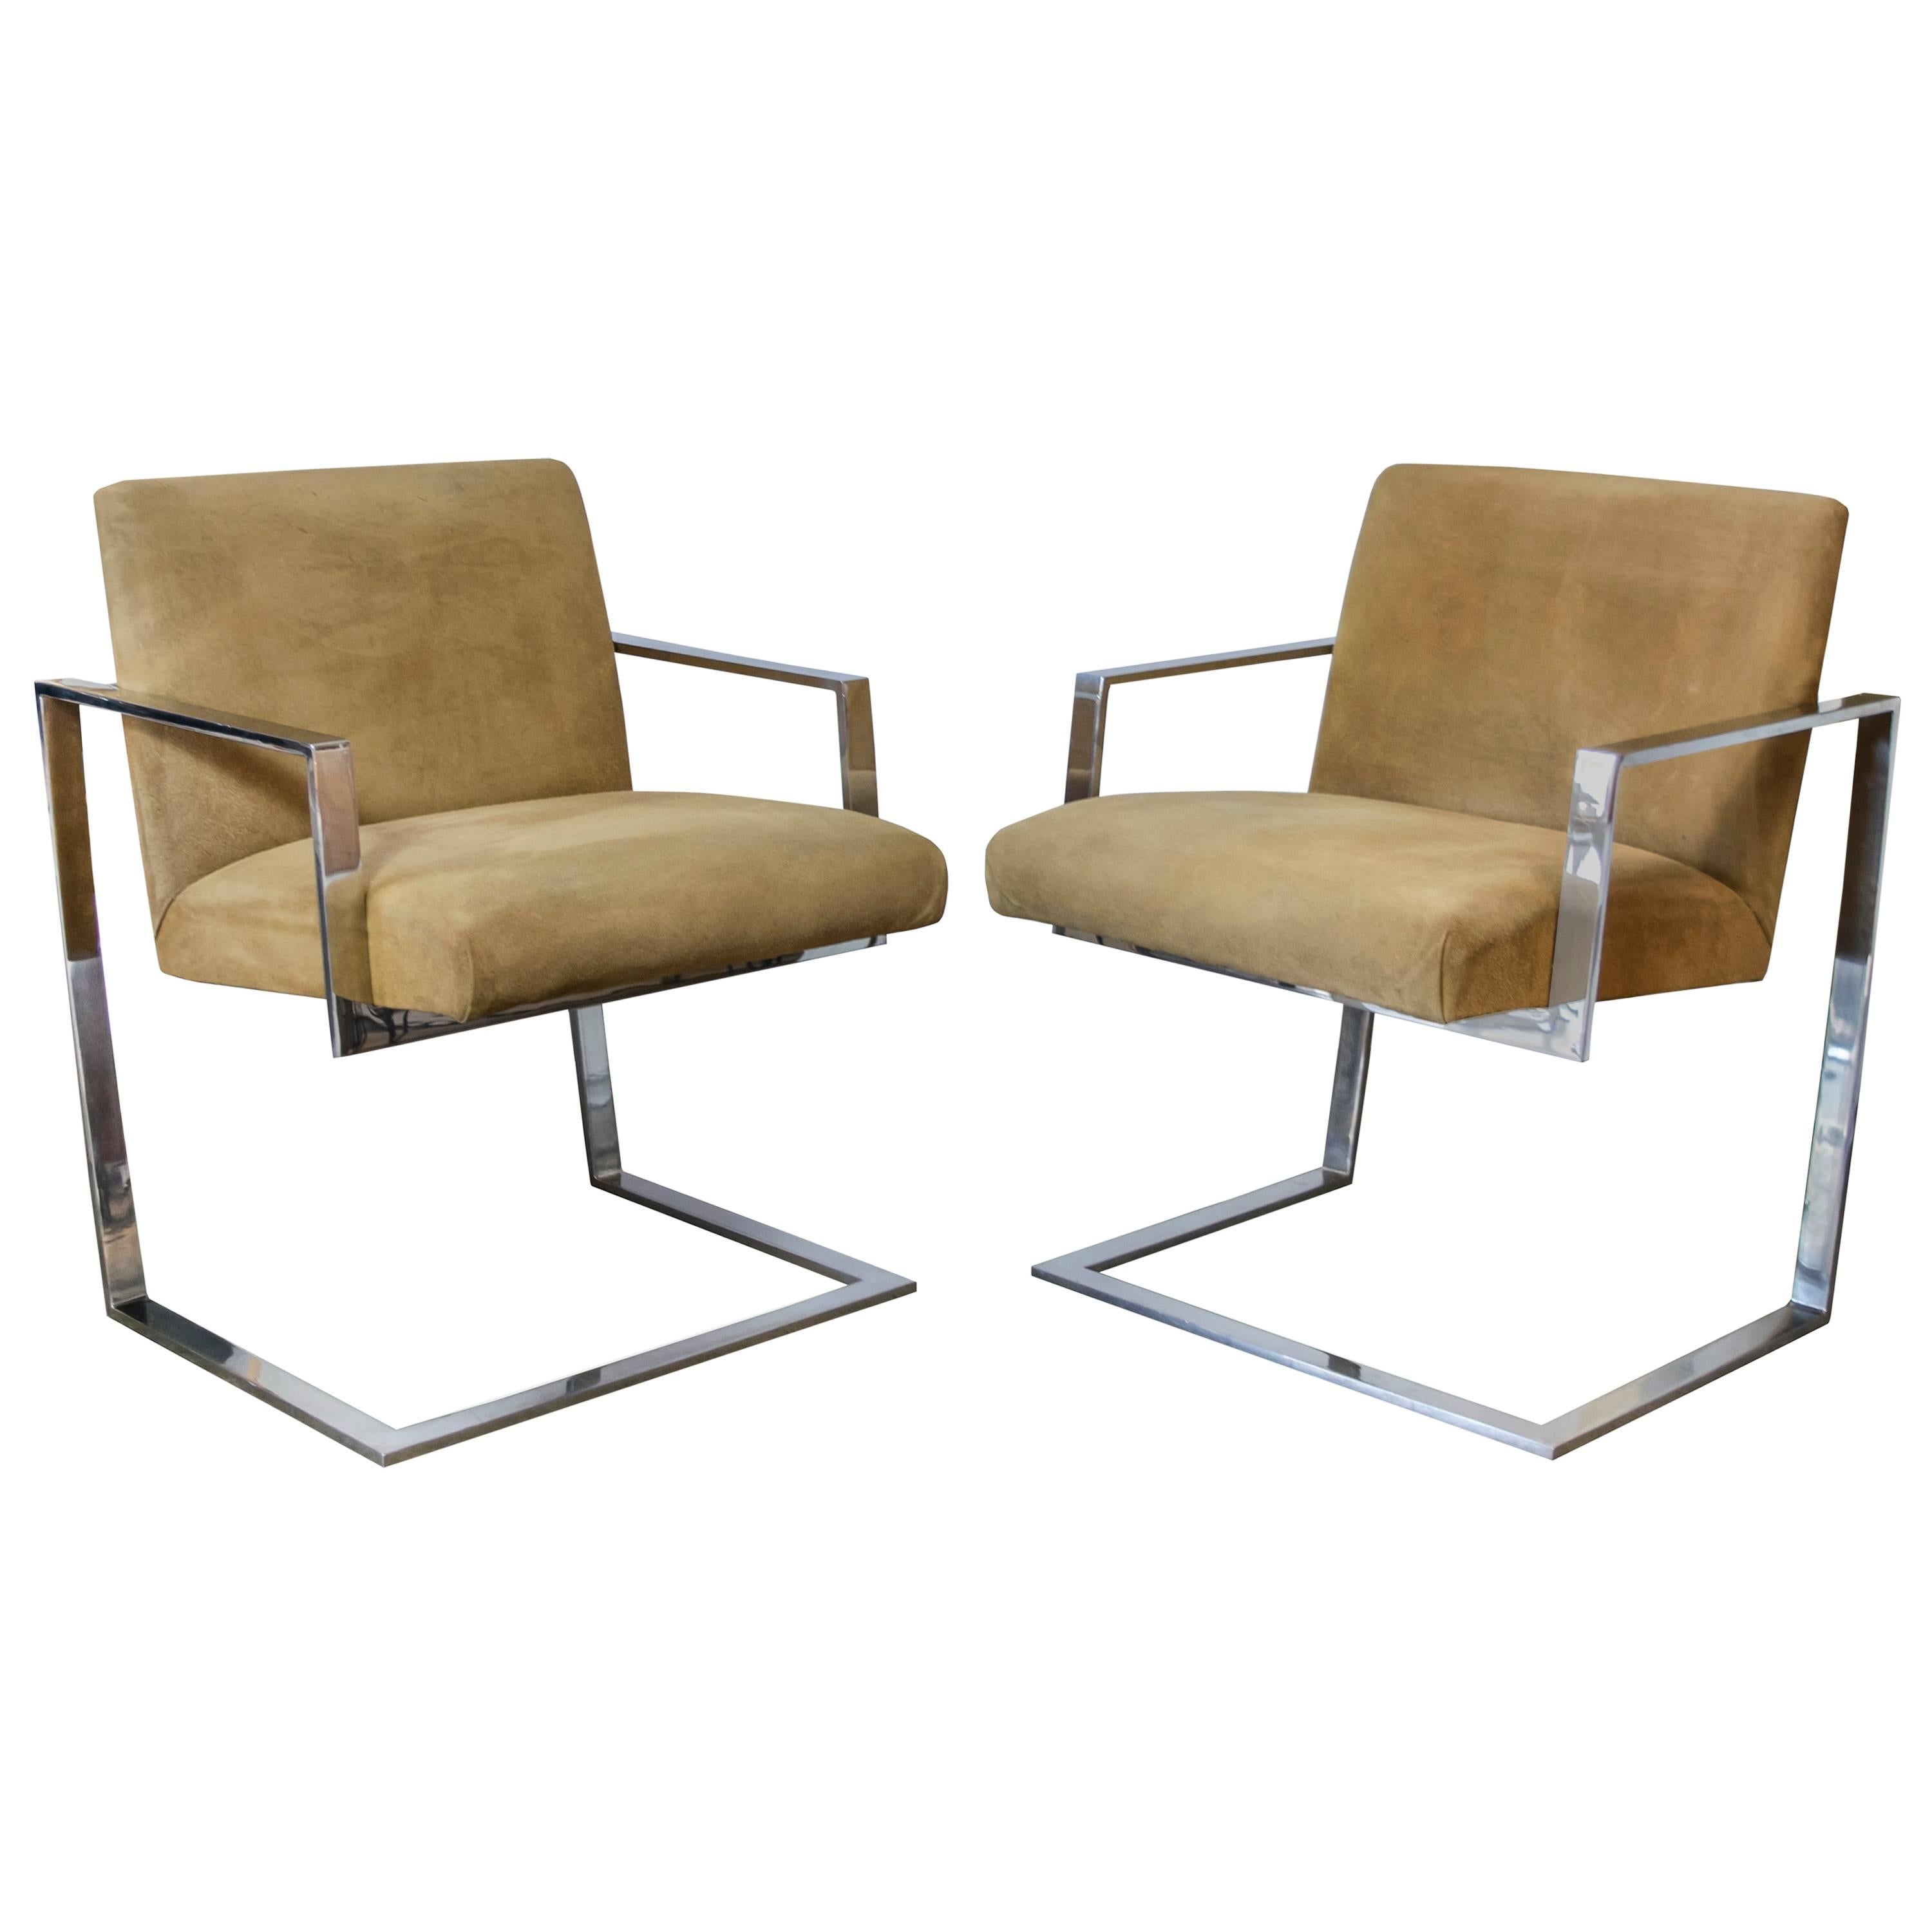 Pace Collection Cantilevered Chrome and Camel Suede Chairs